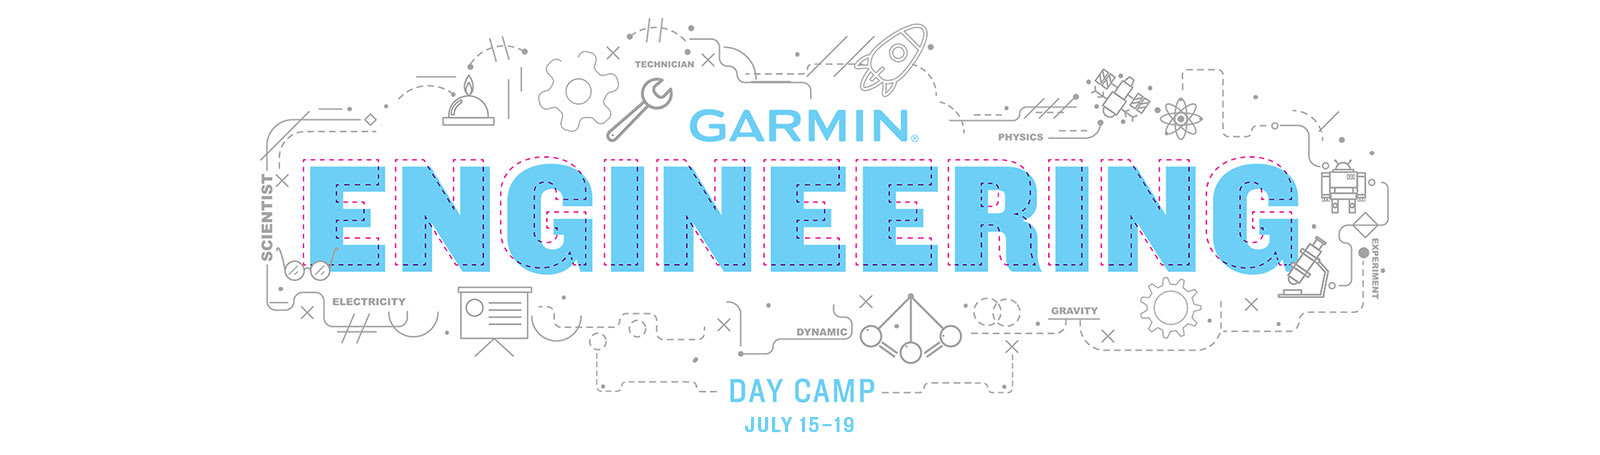 Garmin Engineering Day Camp Collateral - Banner Graphic